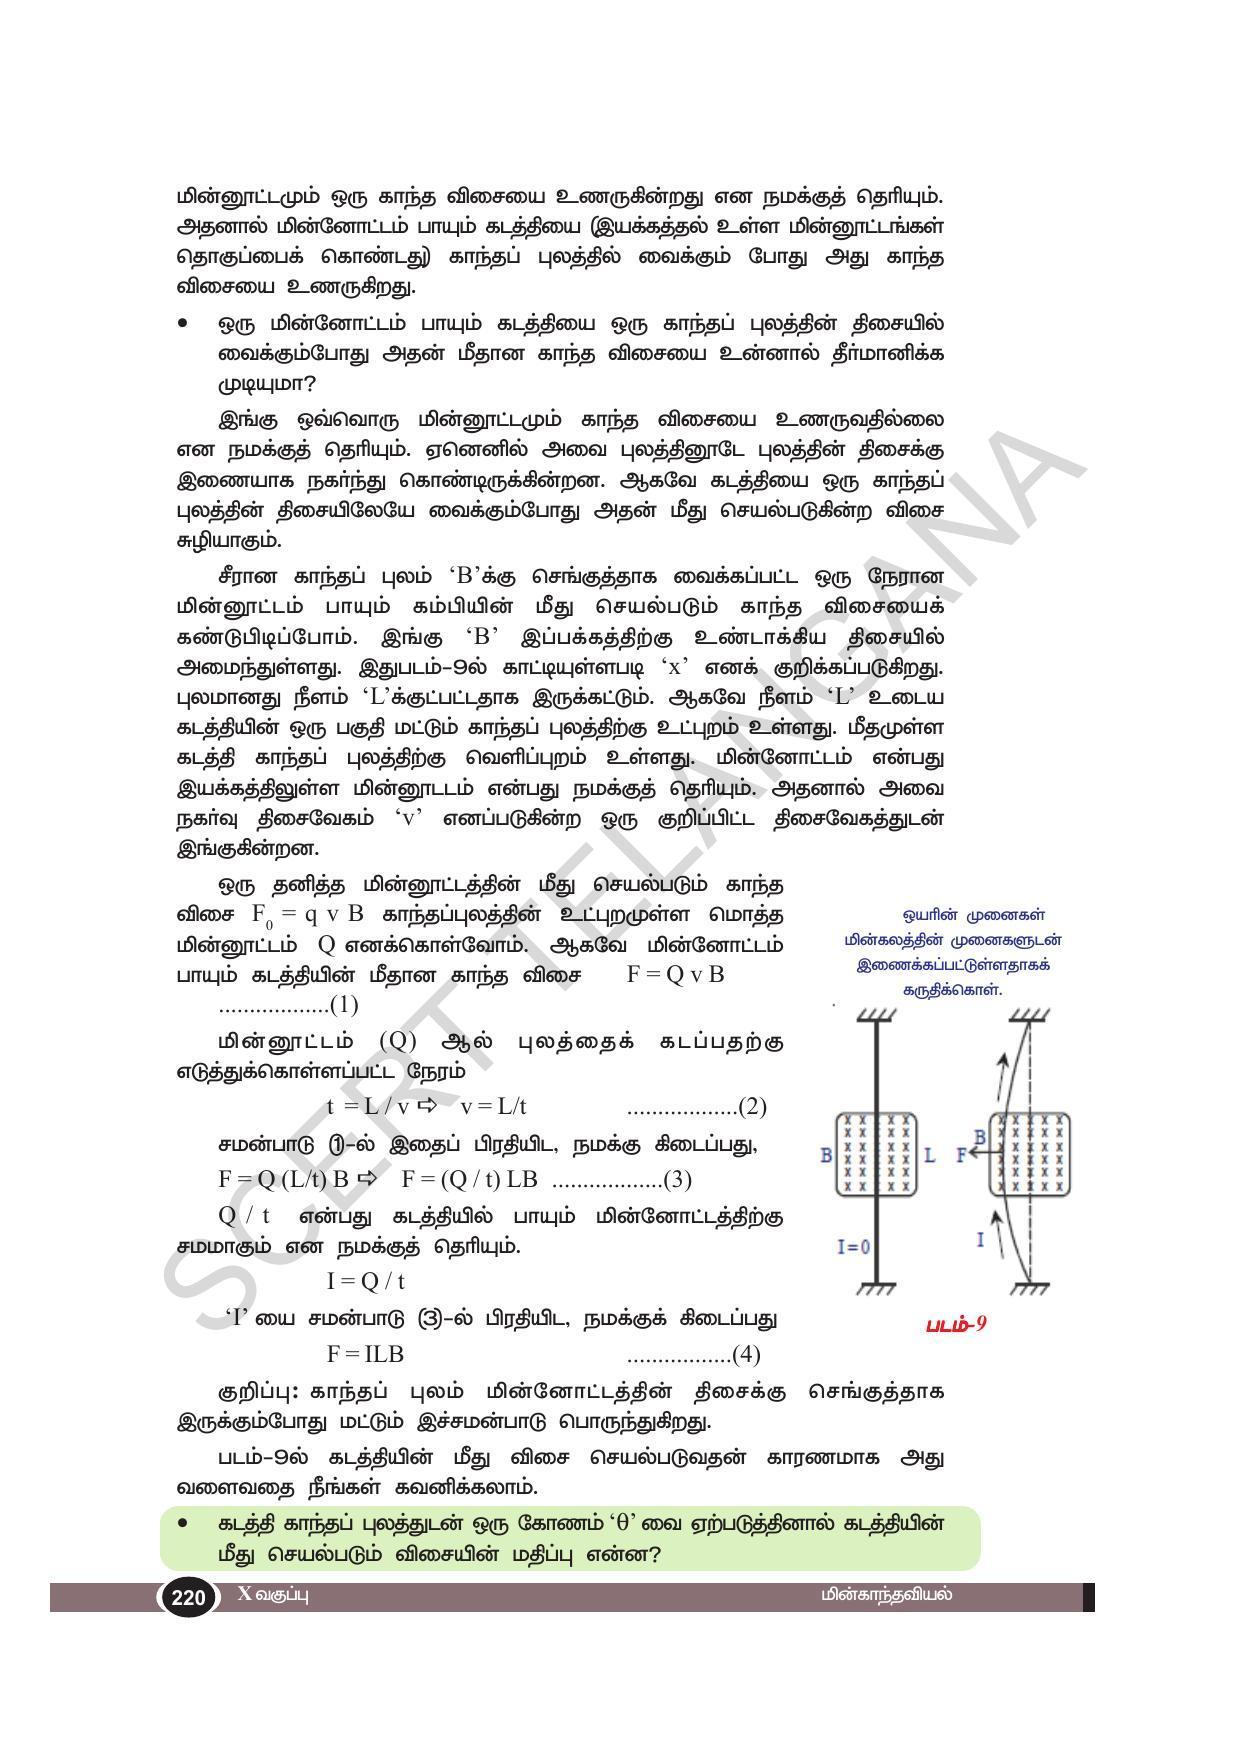 TS SCERT Class 10 Physical Science(Tamil Medium) Text Book - Page 232